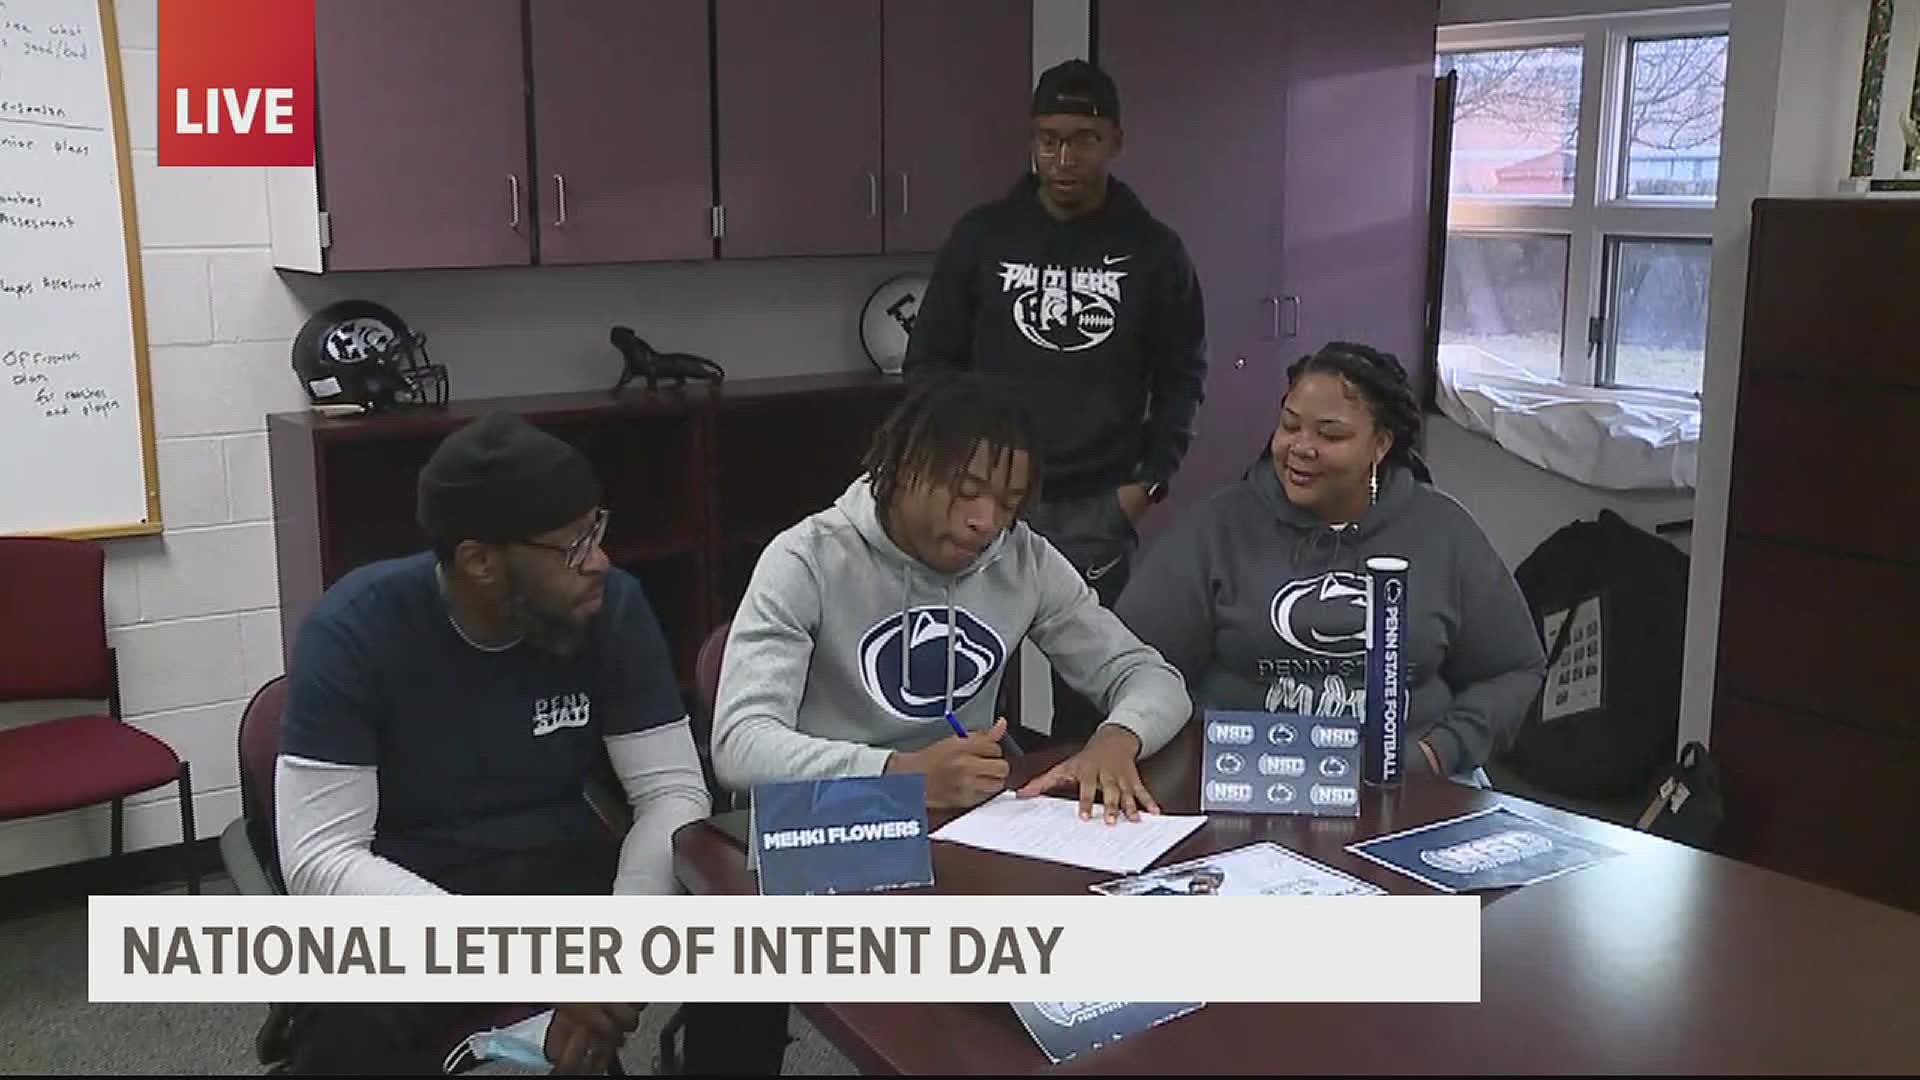 Andrew Kalista traveled to Central Dauphin High School for football star Mekhi Flowers' commitment to Penn State University.